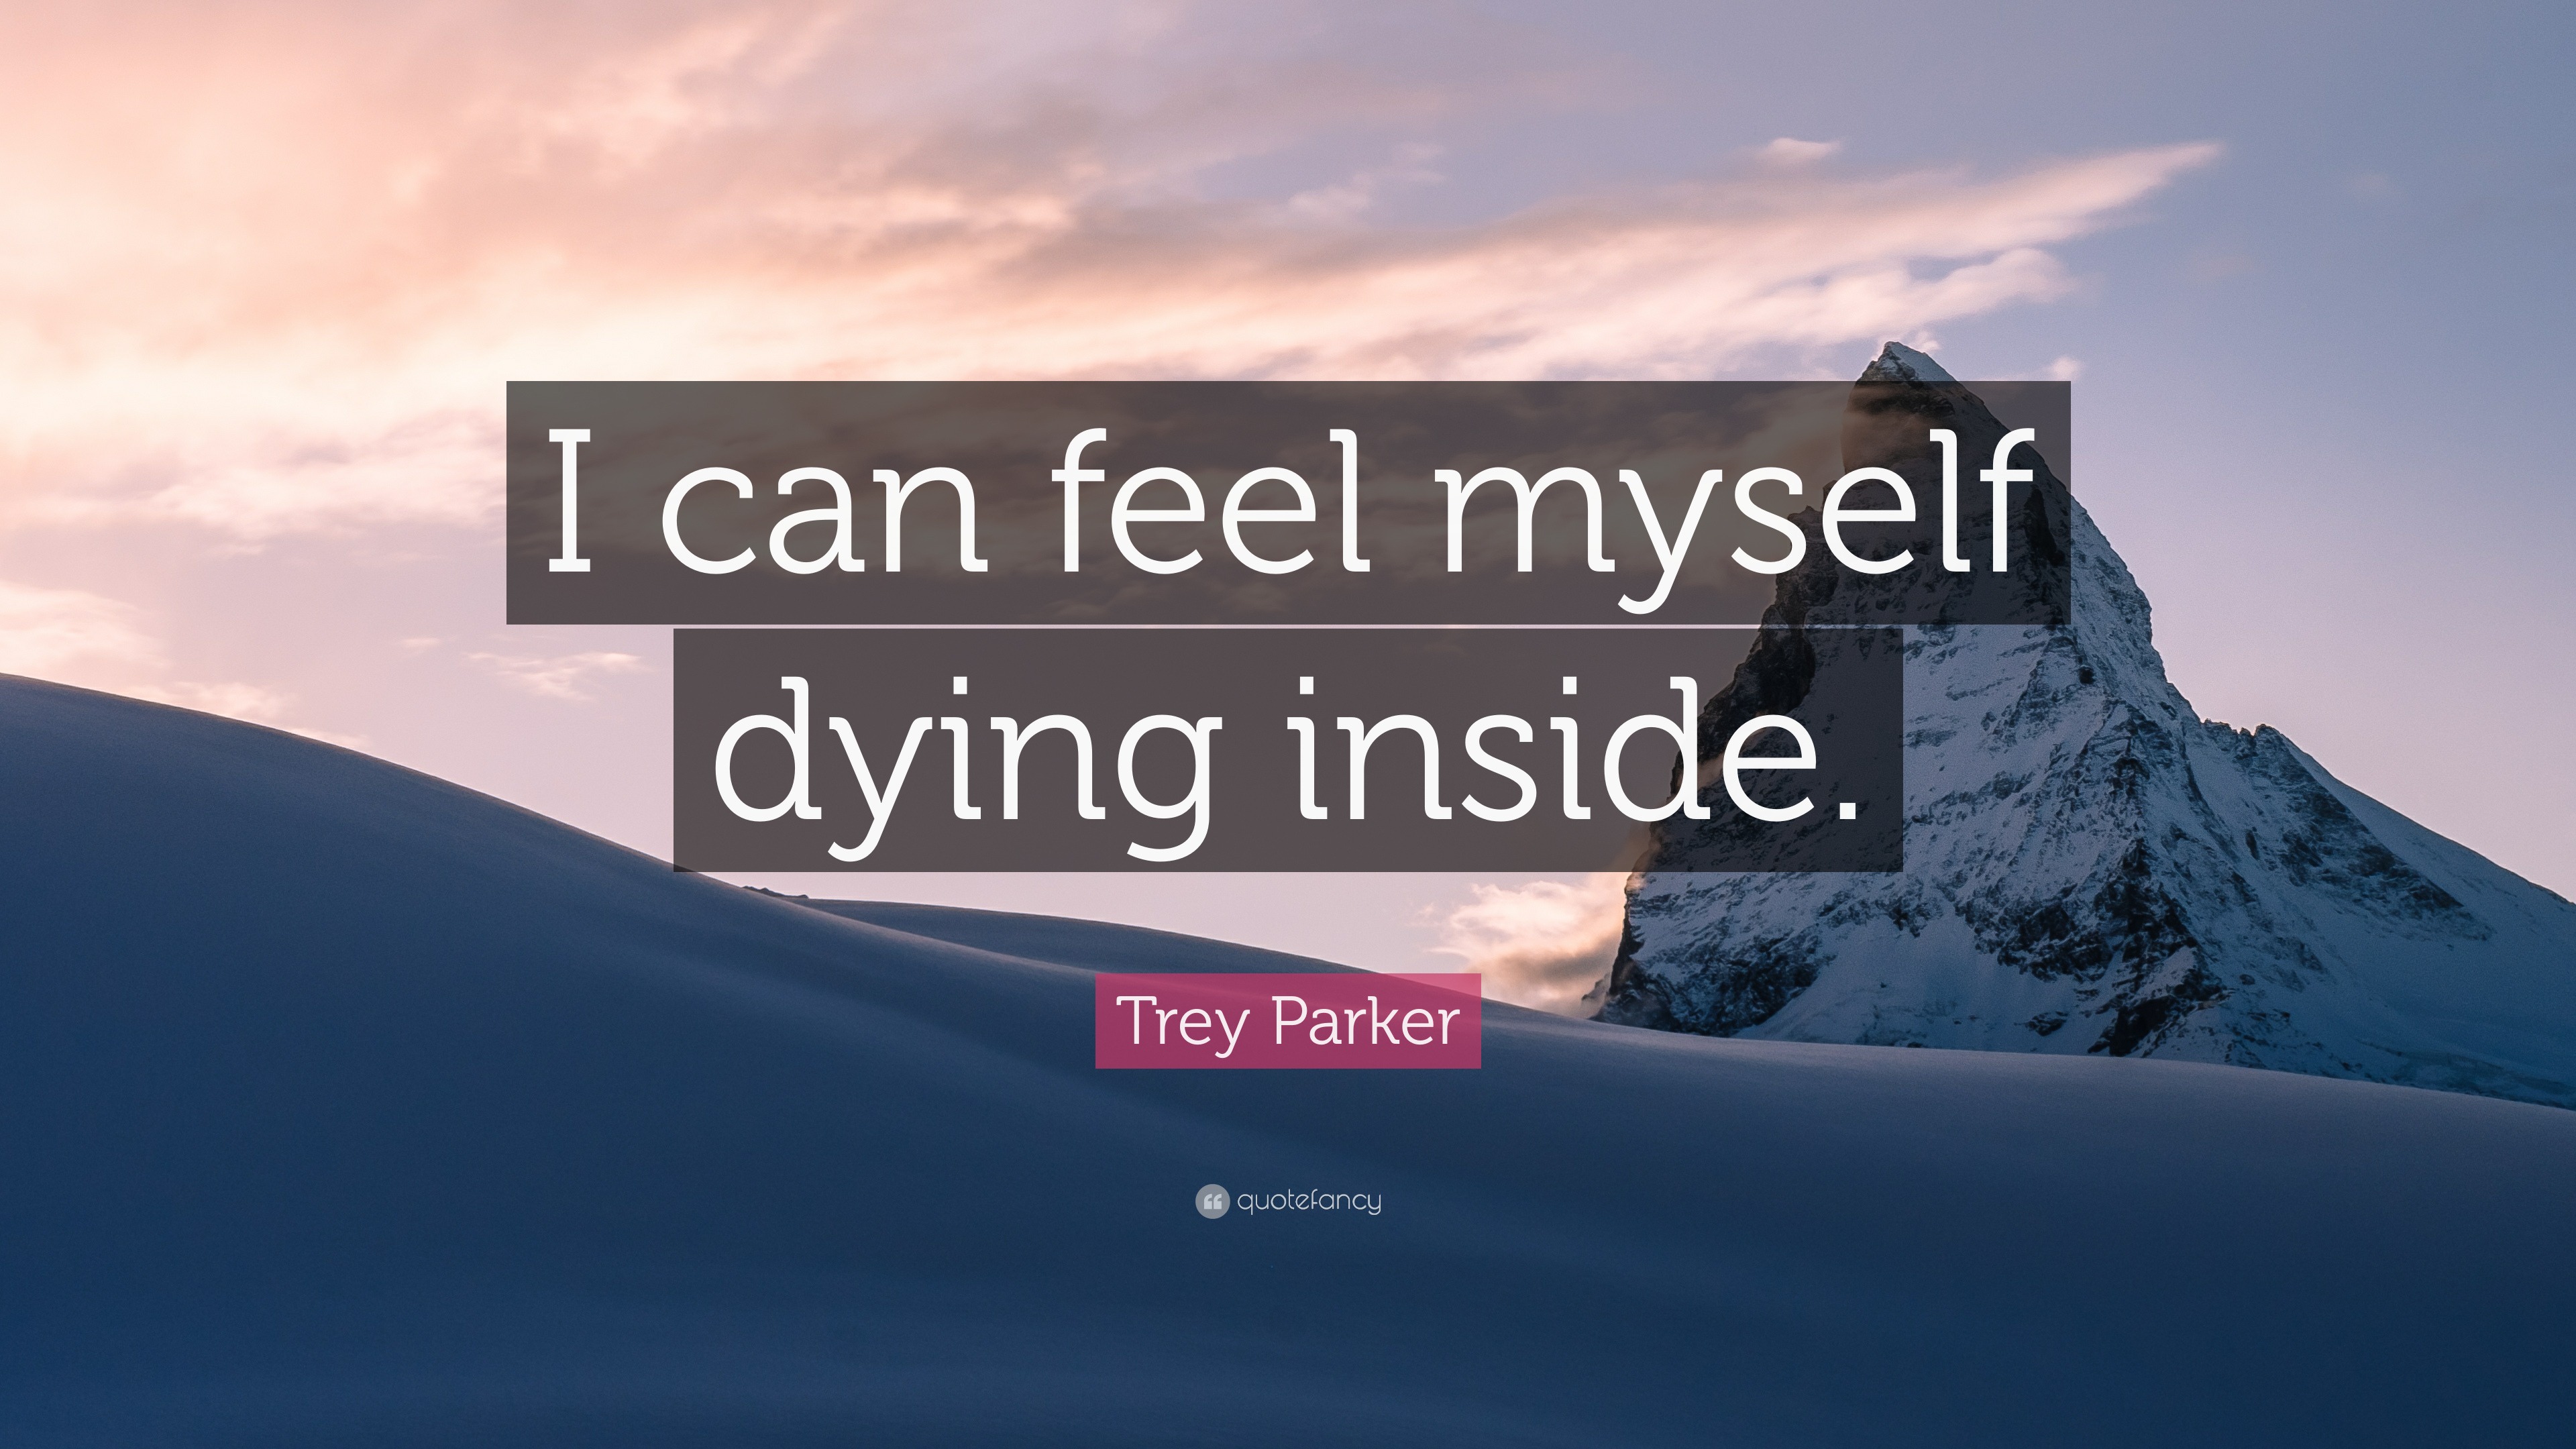 Trey Parker Quote “I can feel myself dying inside.”